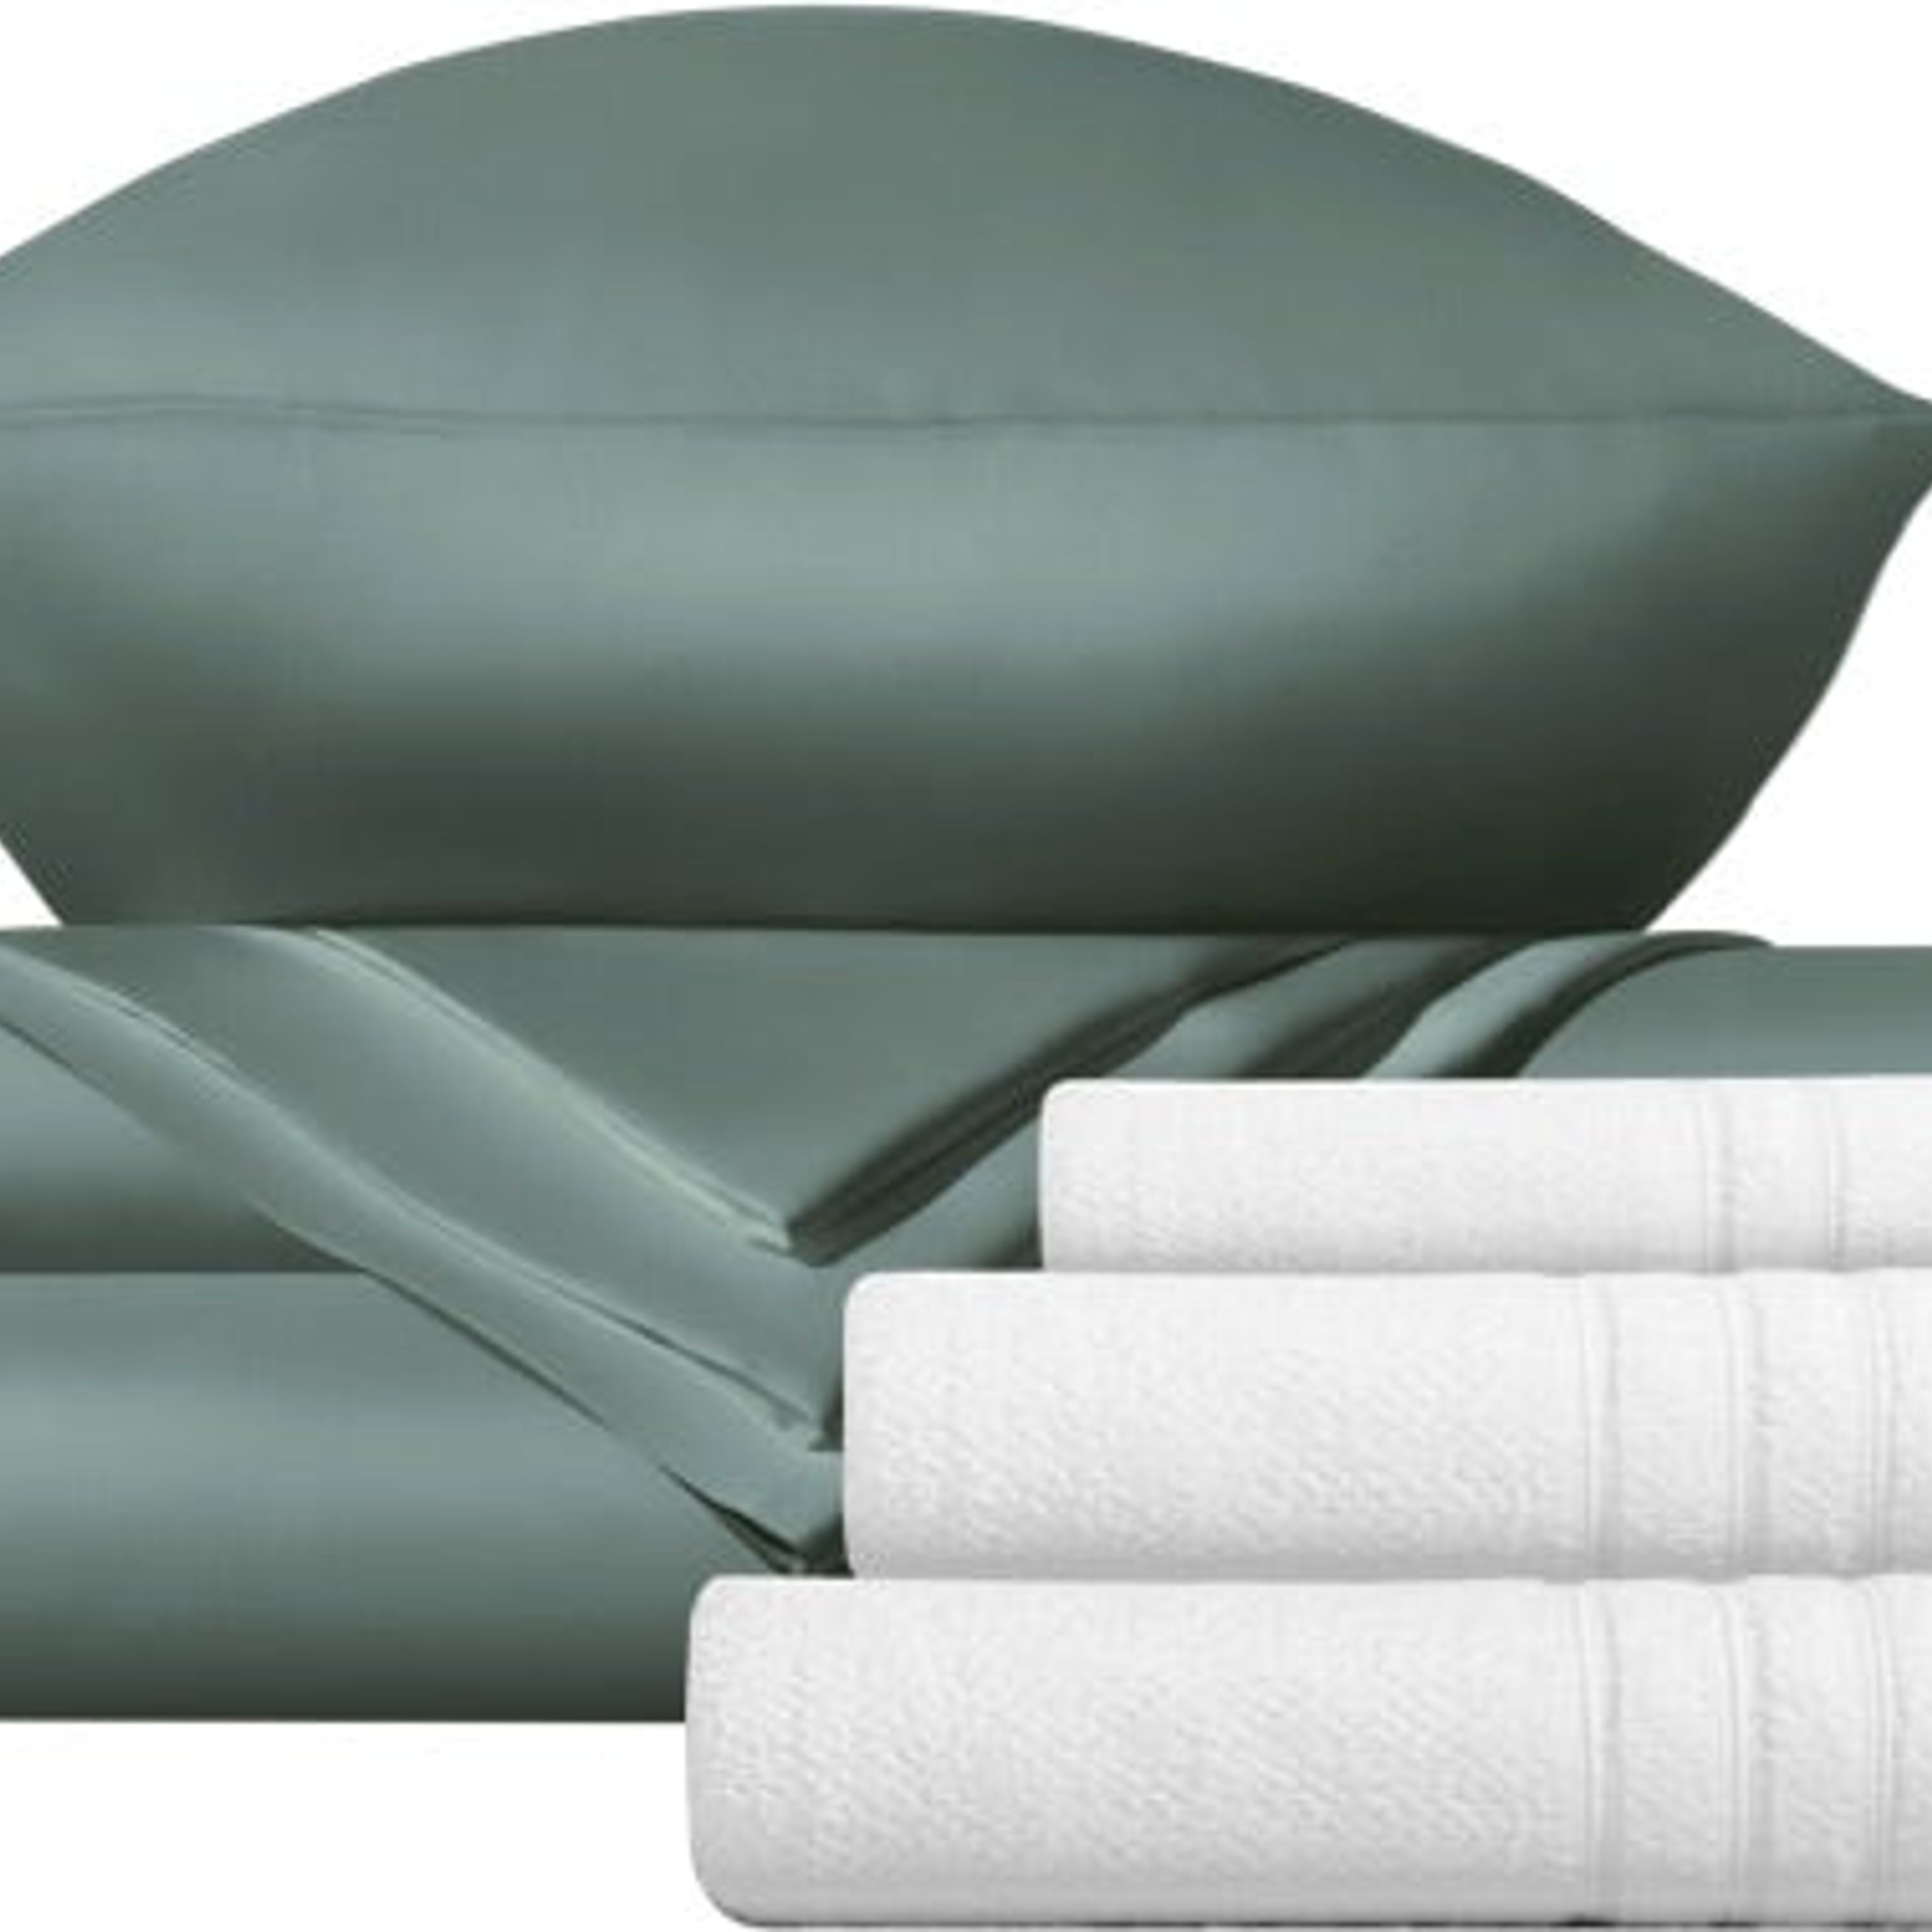 Limited Time Deal - Miracle Sheet Set + 3pc Towel Set